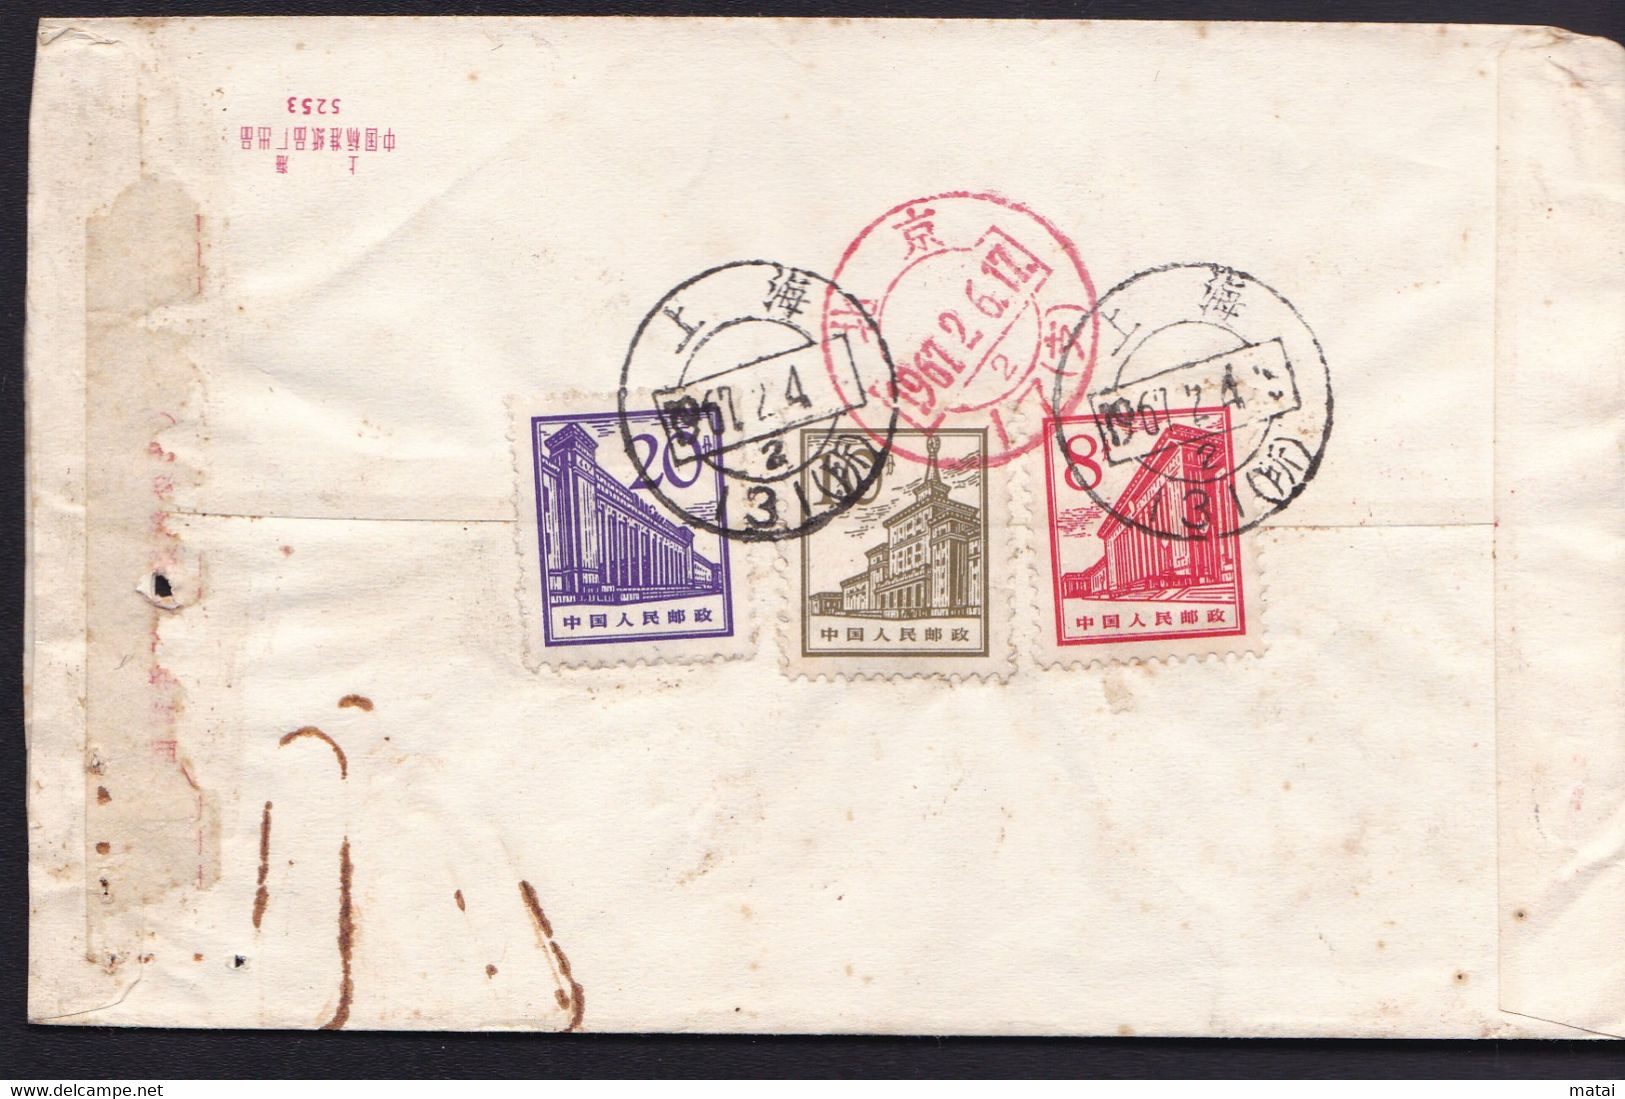 CHINA  CHINE 1967 SHANGHAI TO  Beijing State Council 北京 国务院 COVER 挂号 回执 Receipt Of Registration 0.08f +0.10f+0.20f  RARE - Brieven En Documenten